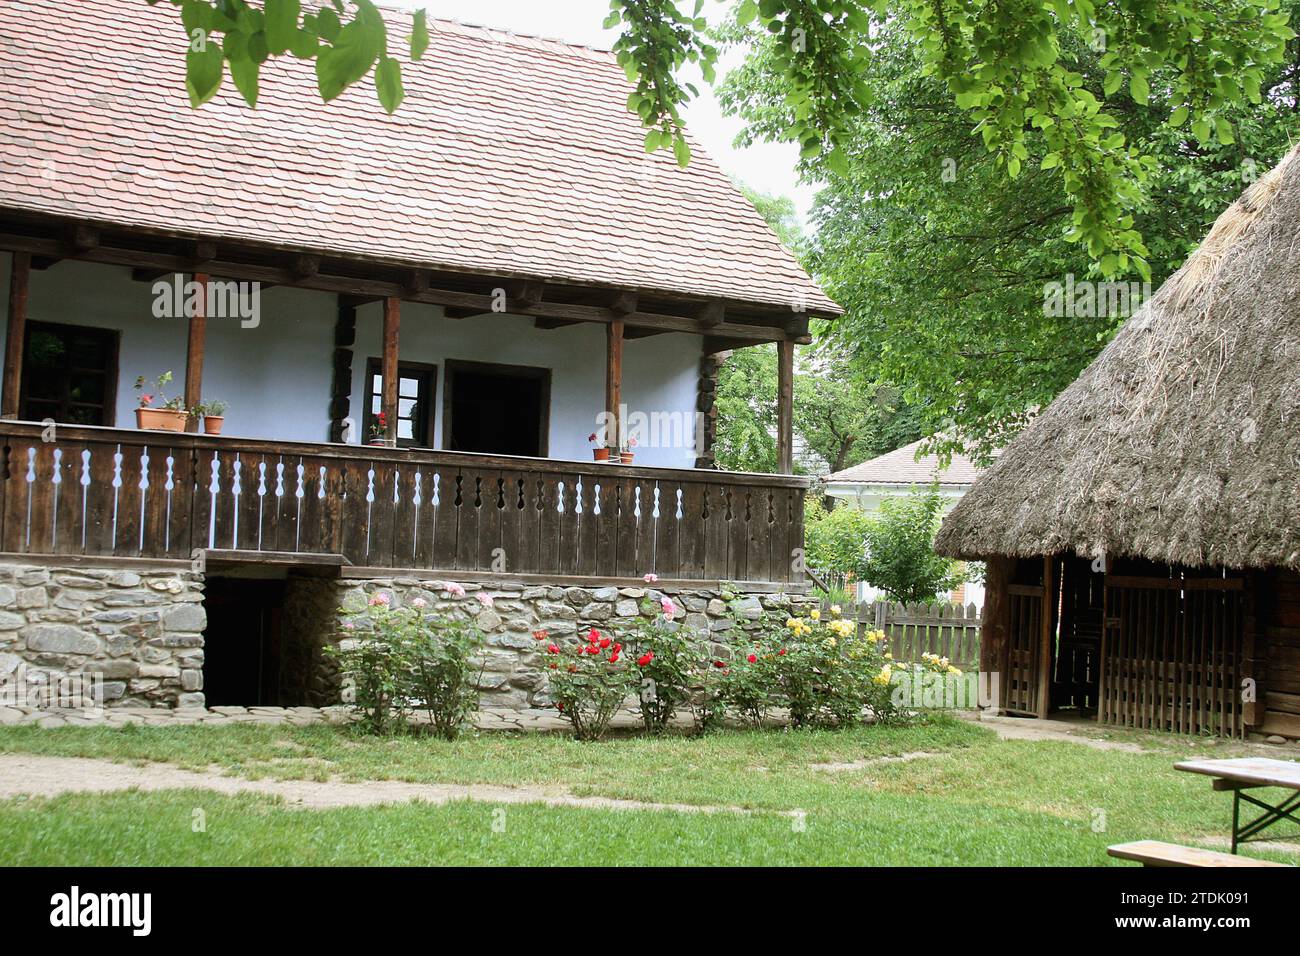 The Village Museum, Bucharest, Romania. Authentic 19th century house from Transylvania, with sculpted wooden porch, river rocks foundation and cellar. Stock Photo